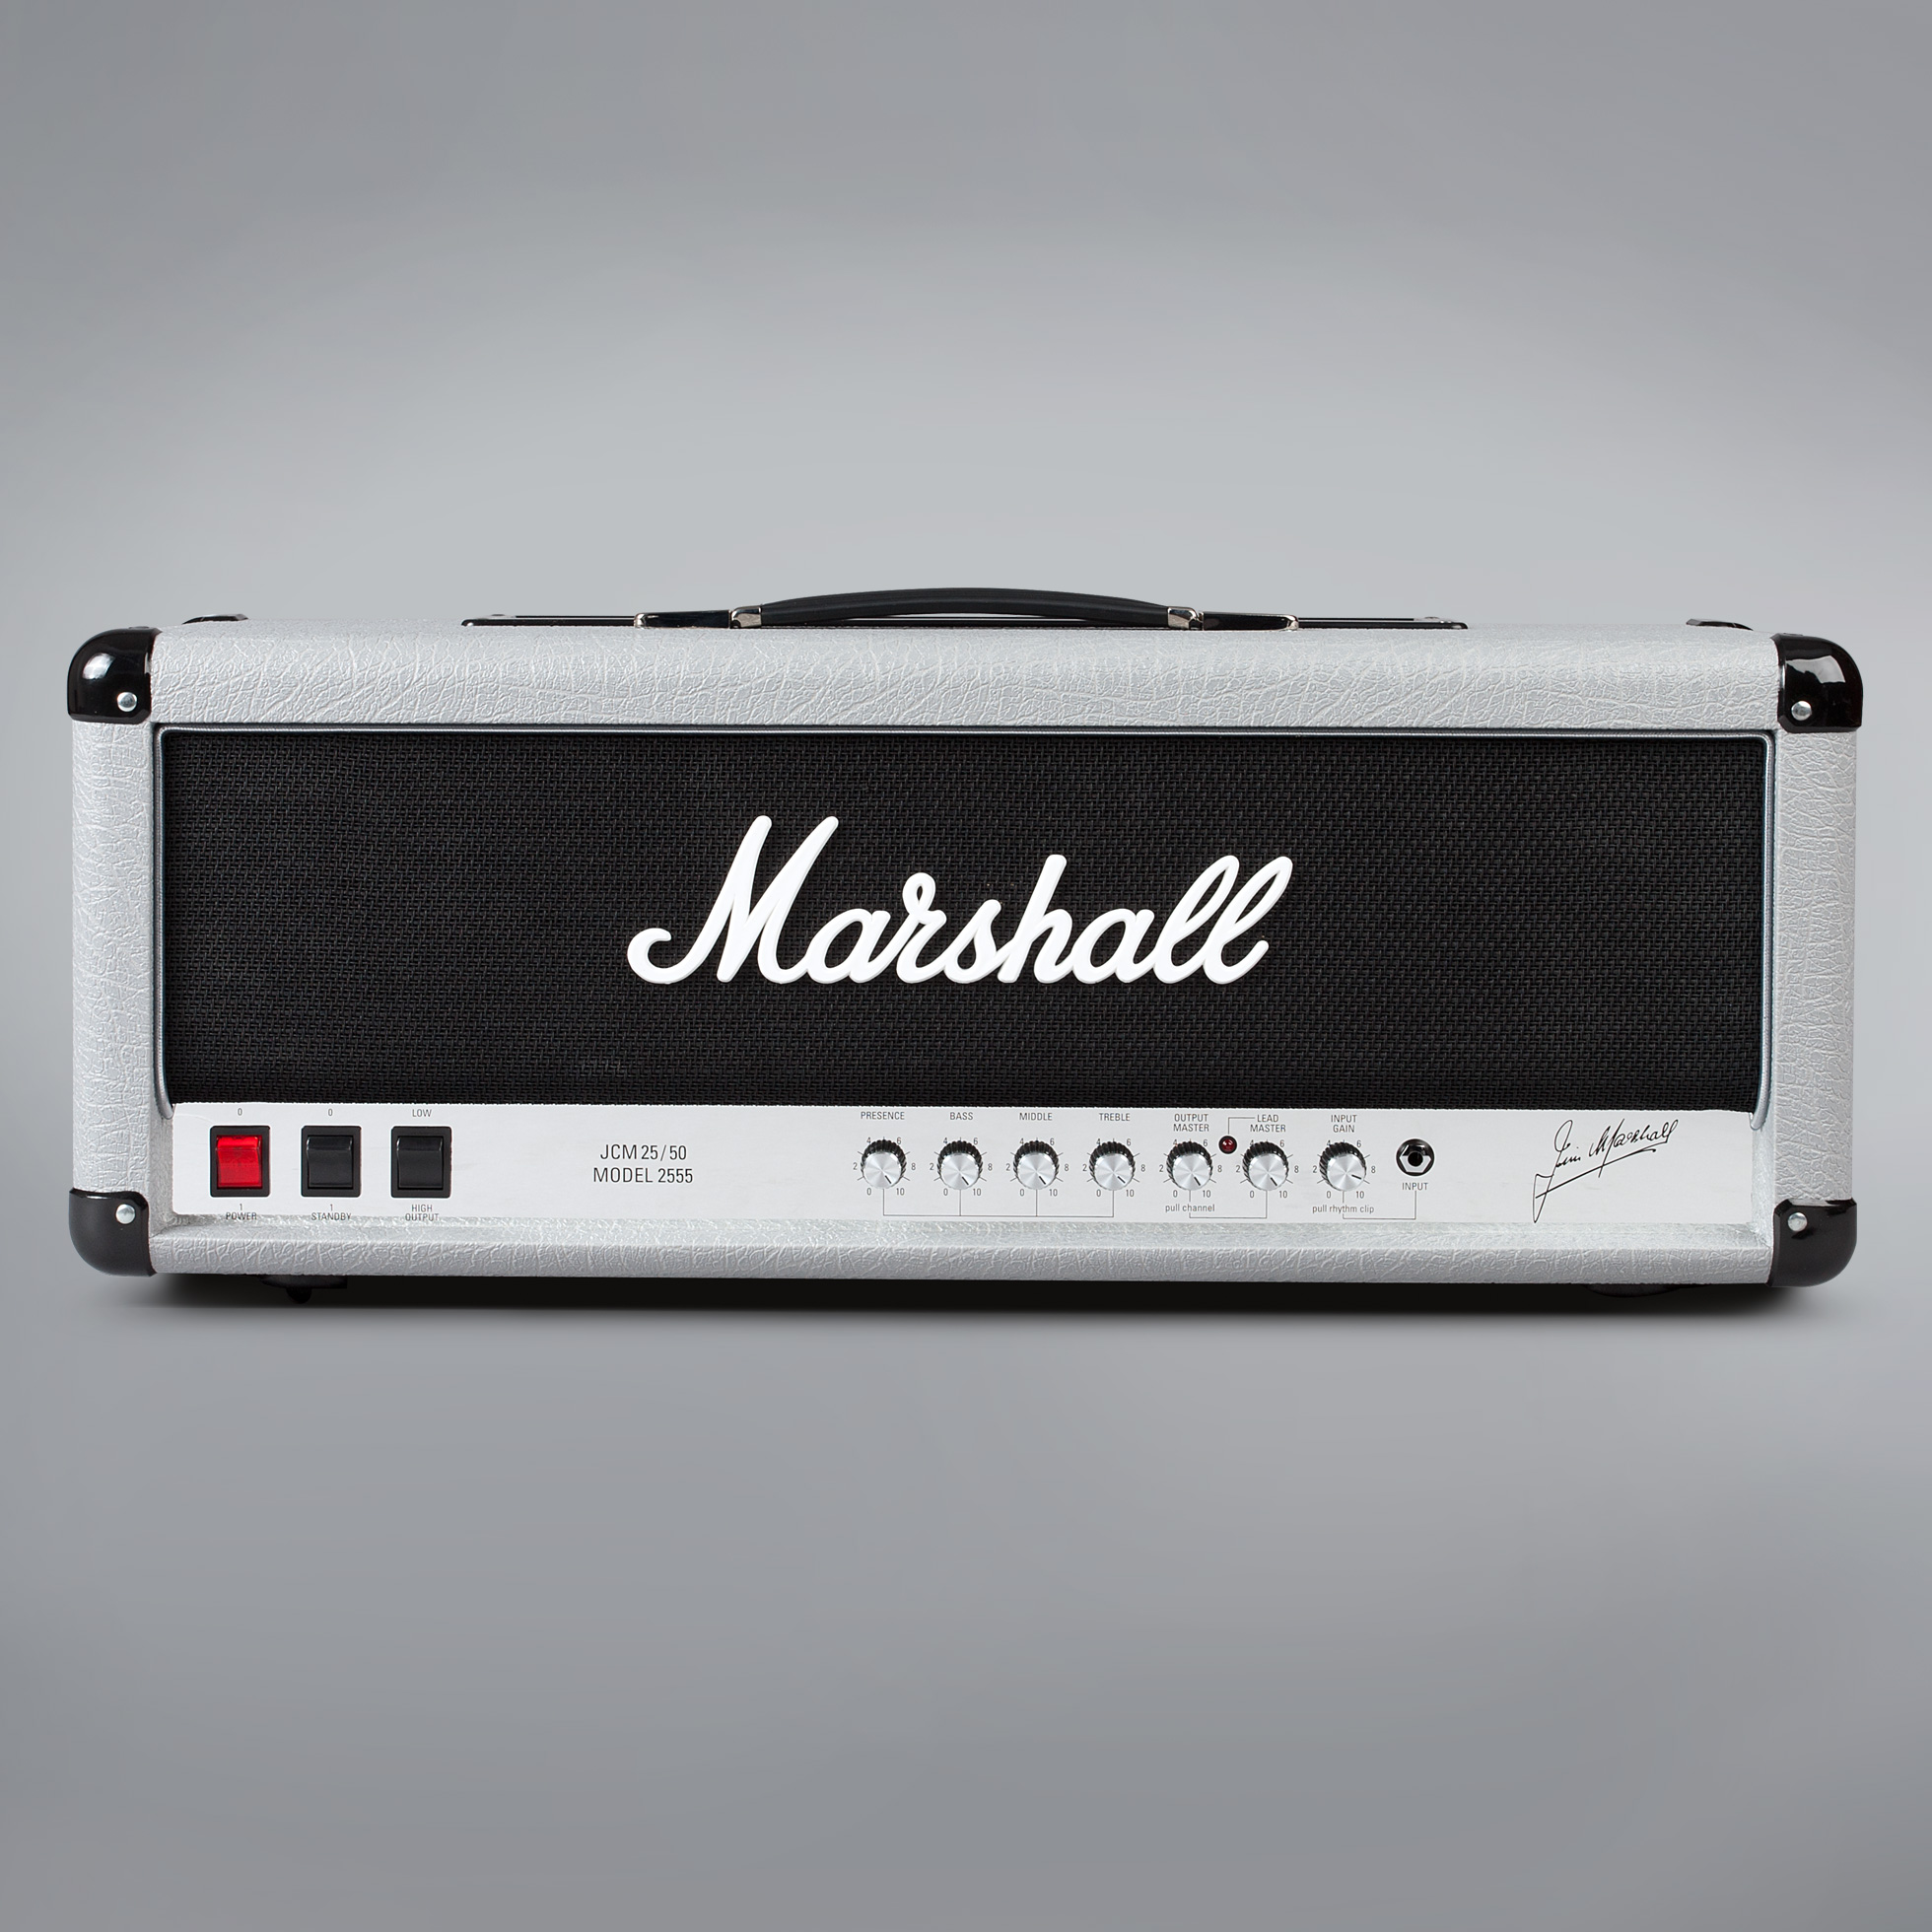 2555X | Vintage | Guitar Amps | 製品情報 | Marshall Amps